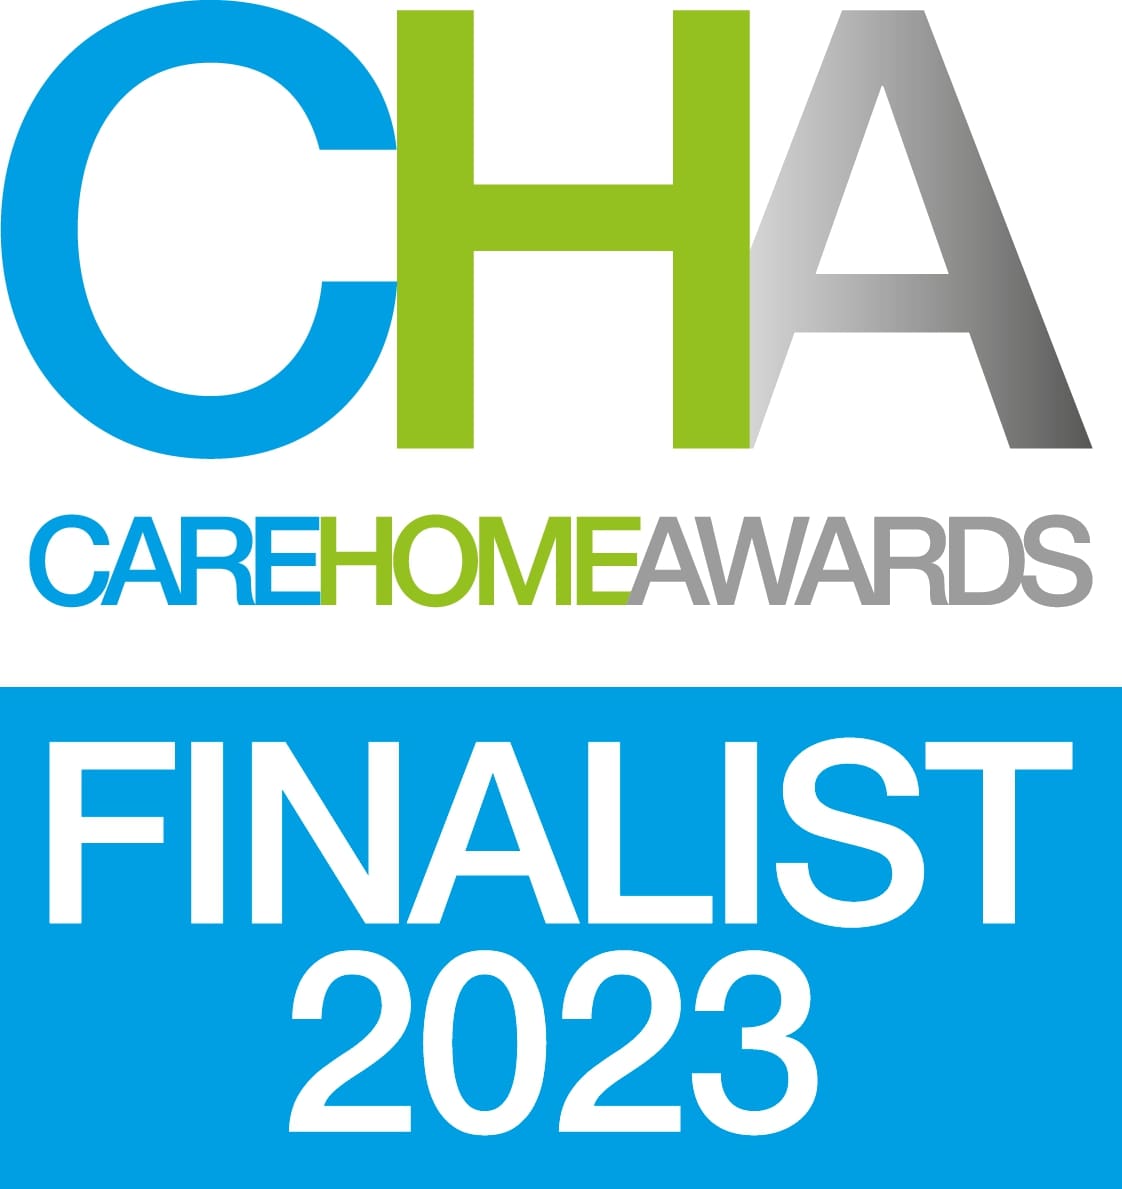 Care Home Awards 2023 Finalist - Best for Wellbeing 